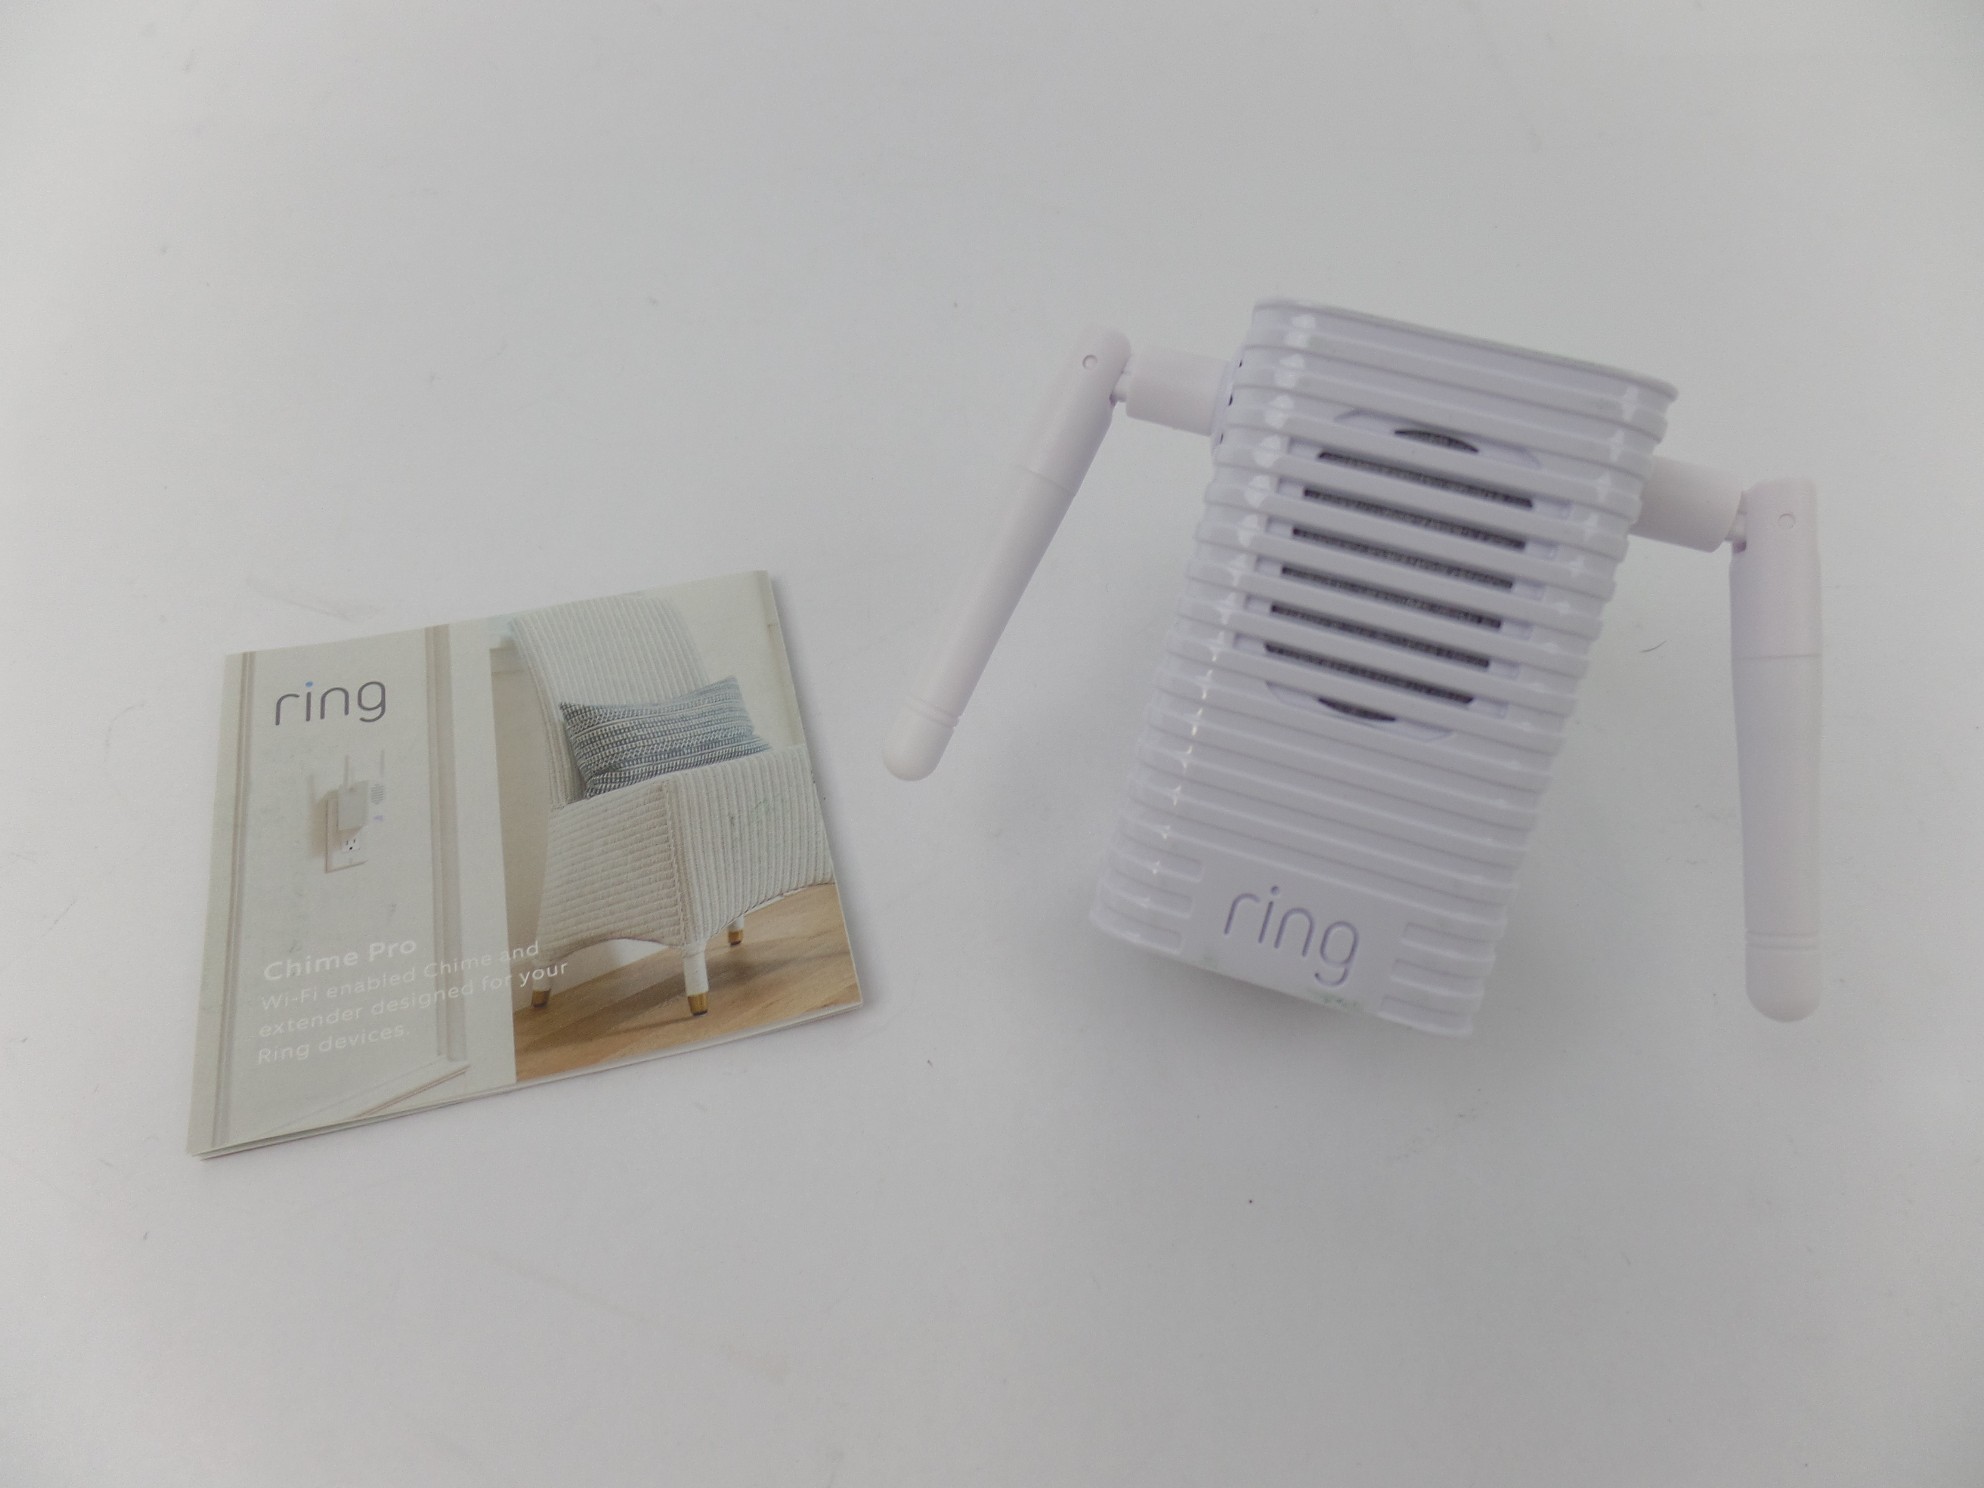 Ring Chime Pro Door Bell Plug-In  Wi-Fi Extender and Chime 88PR000FC000